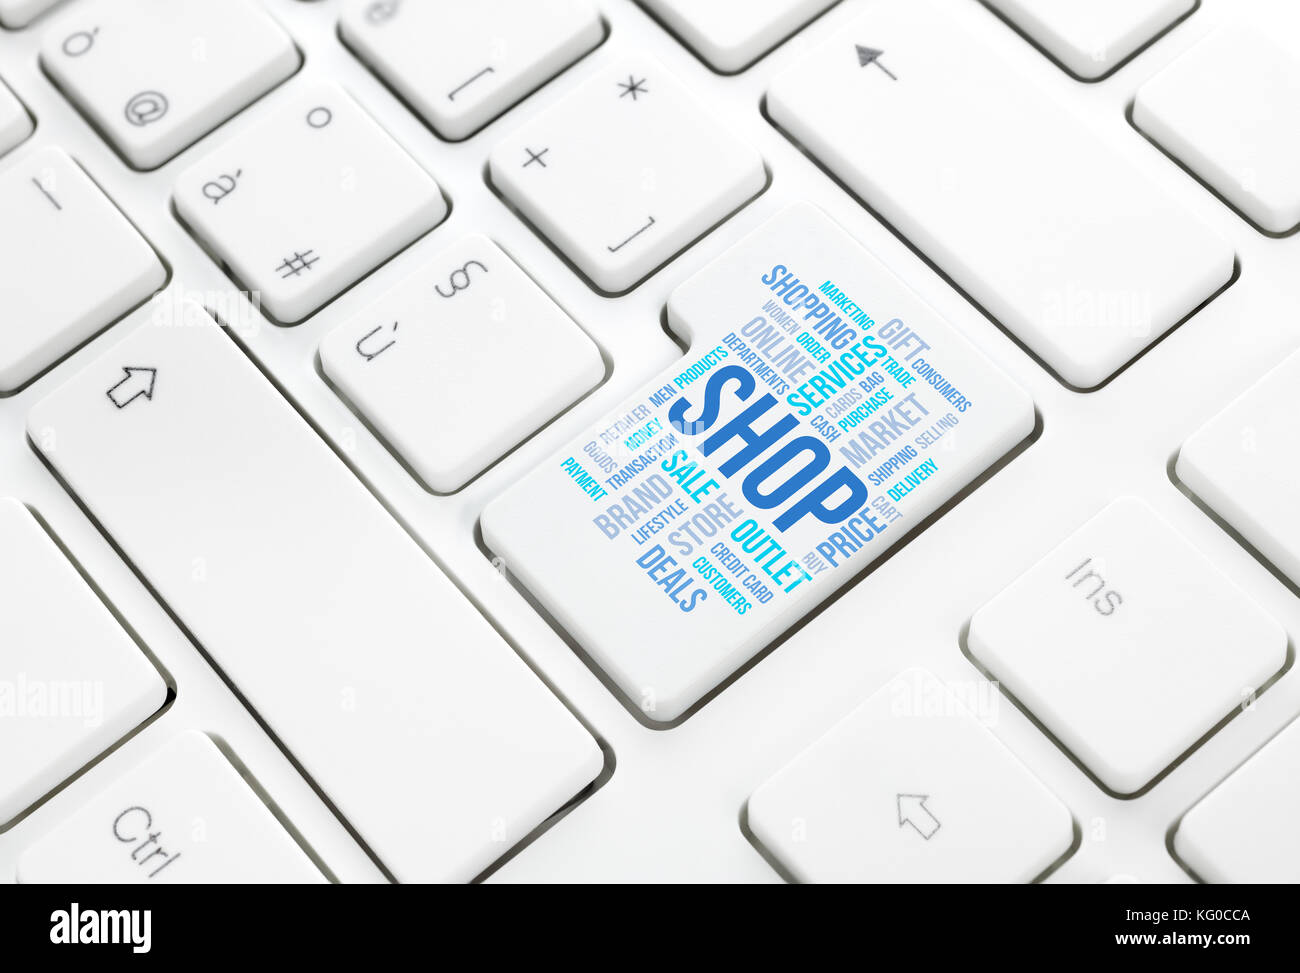 Shop business concept word cloud in enter button or key on white keyboard Stock Photo